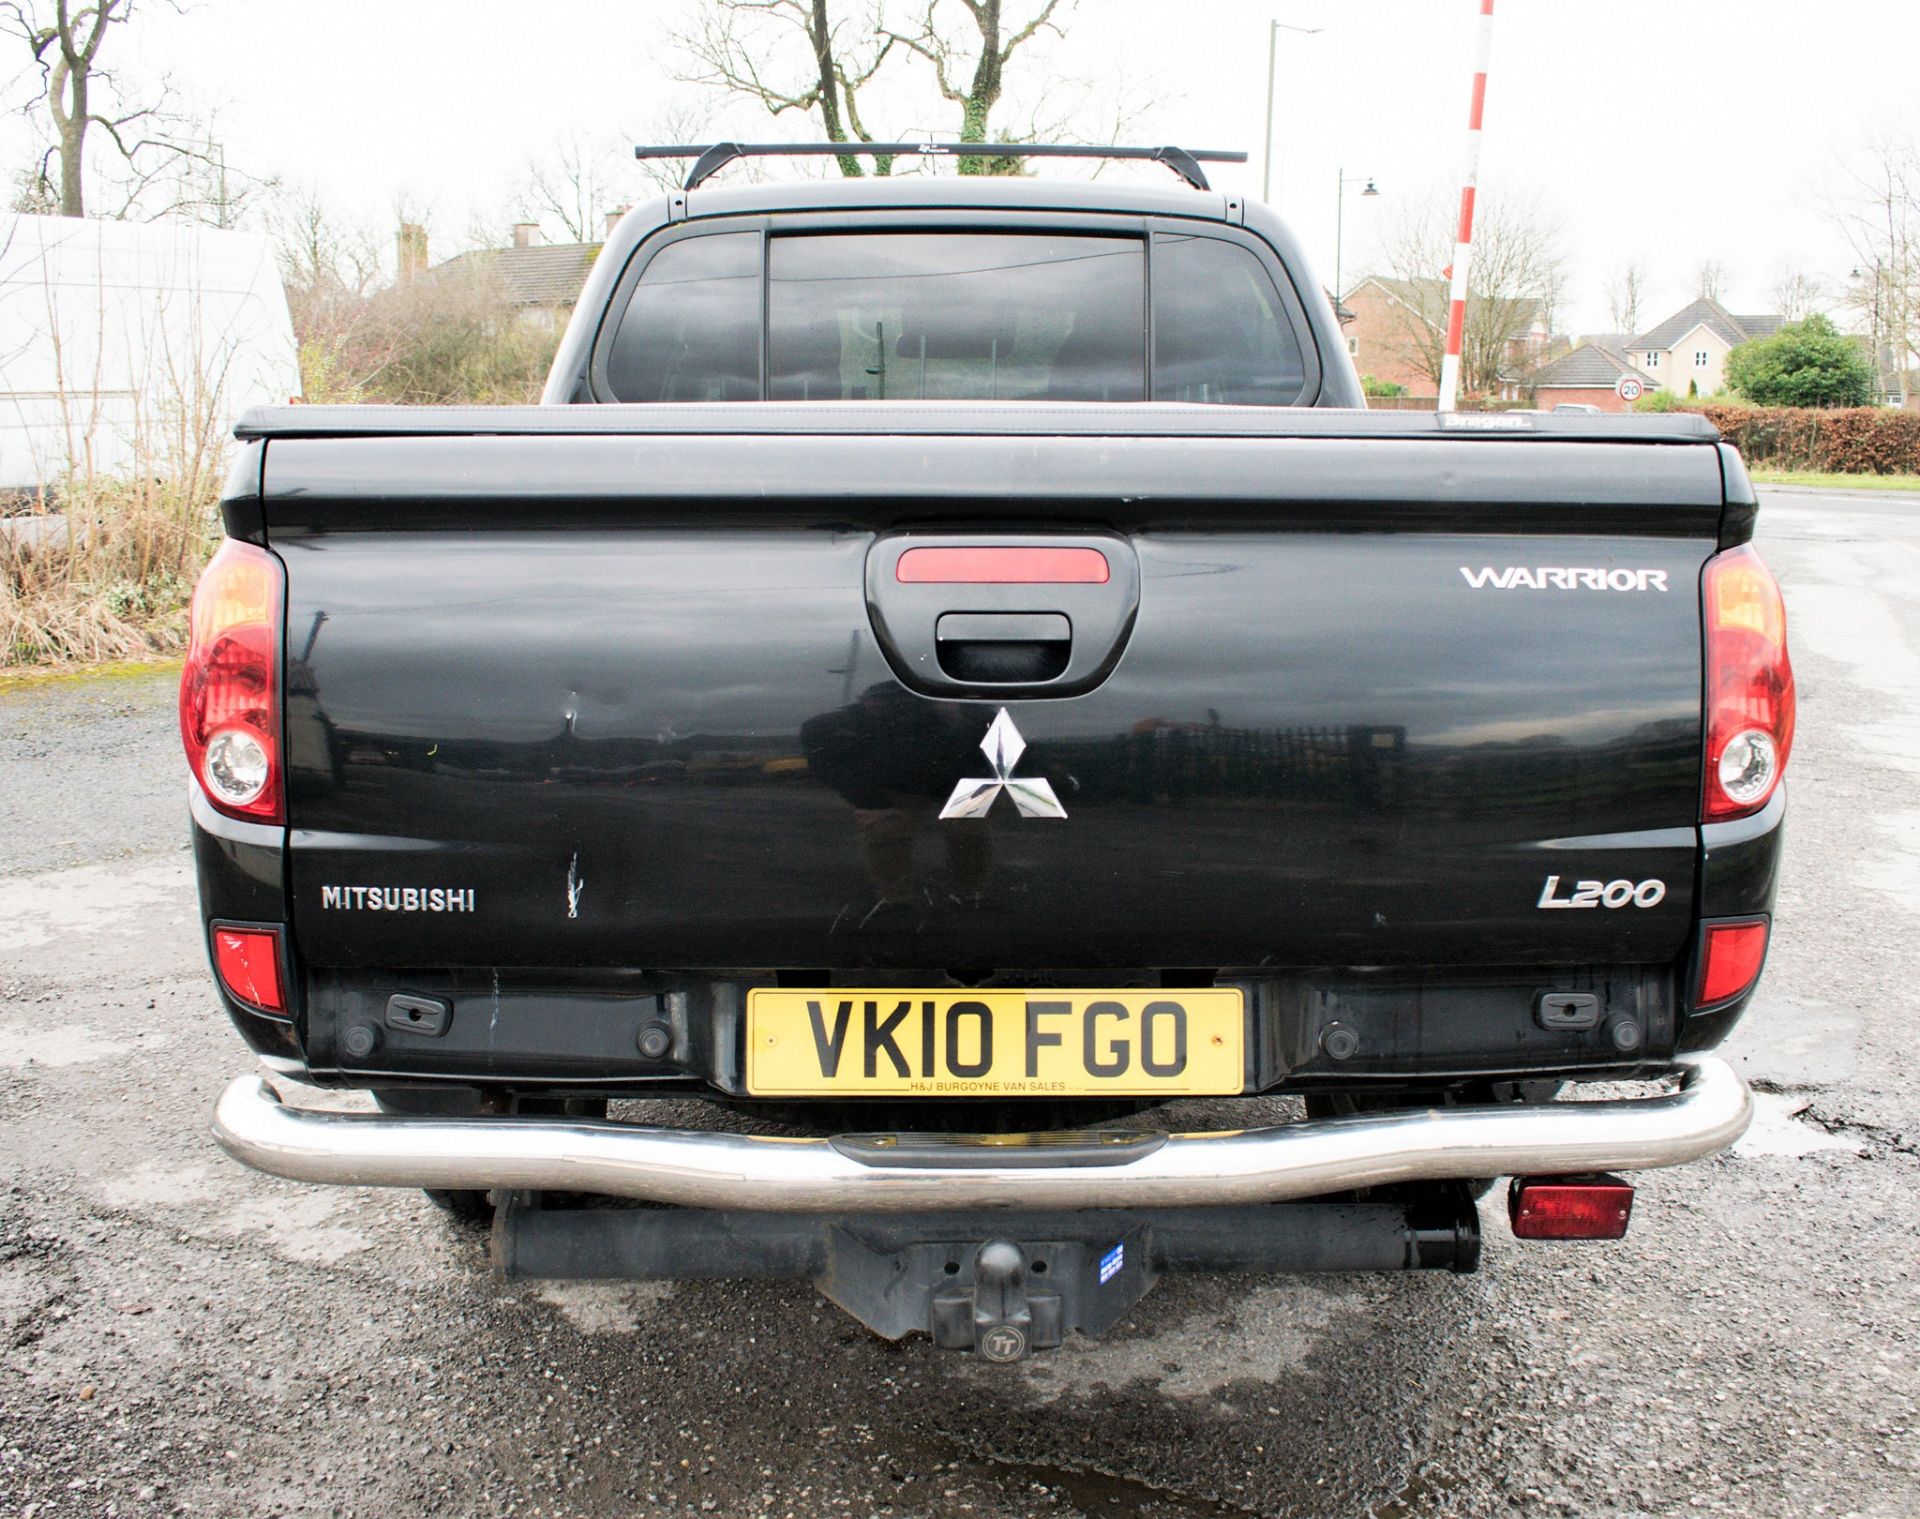 Mitsubishi L200 DI-D Auto double cab pick up Registration Number: VK10 FGO Date of Registration: - Image 6 of 21